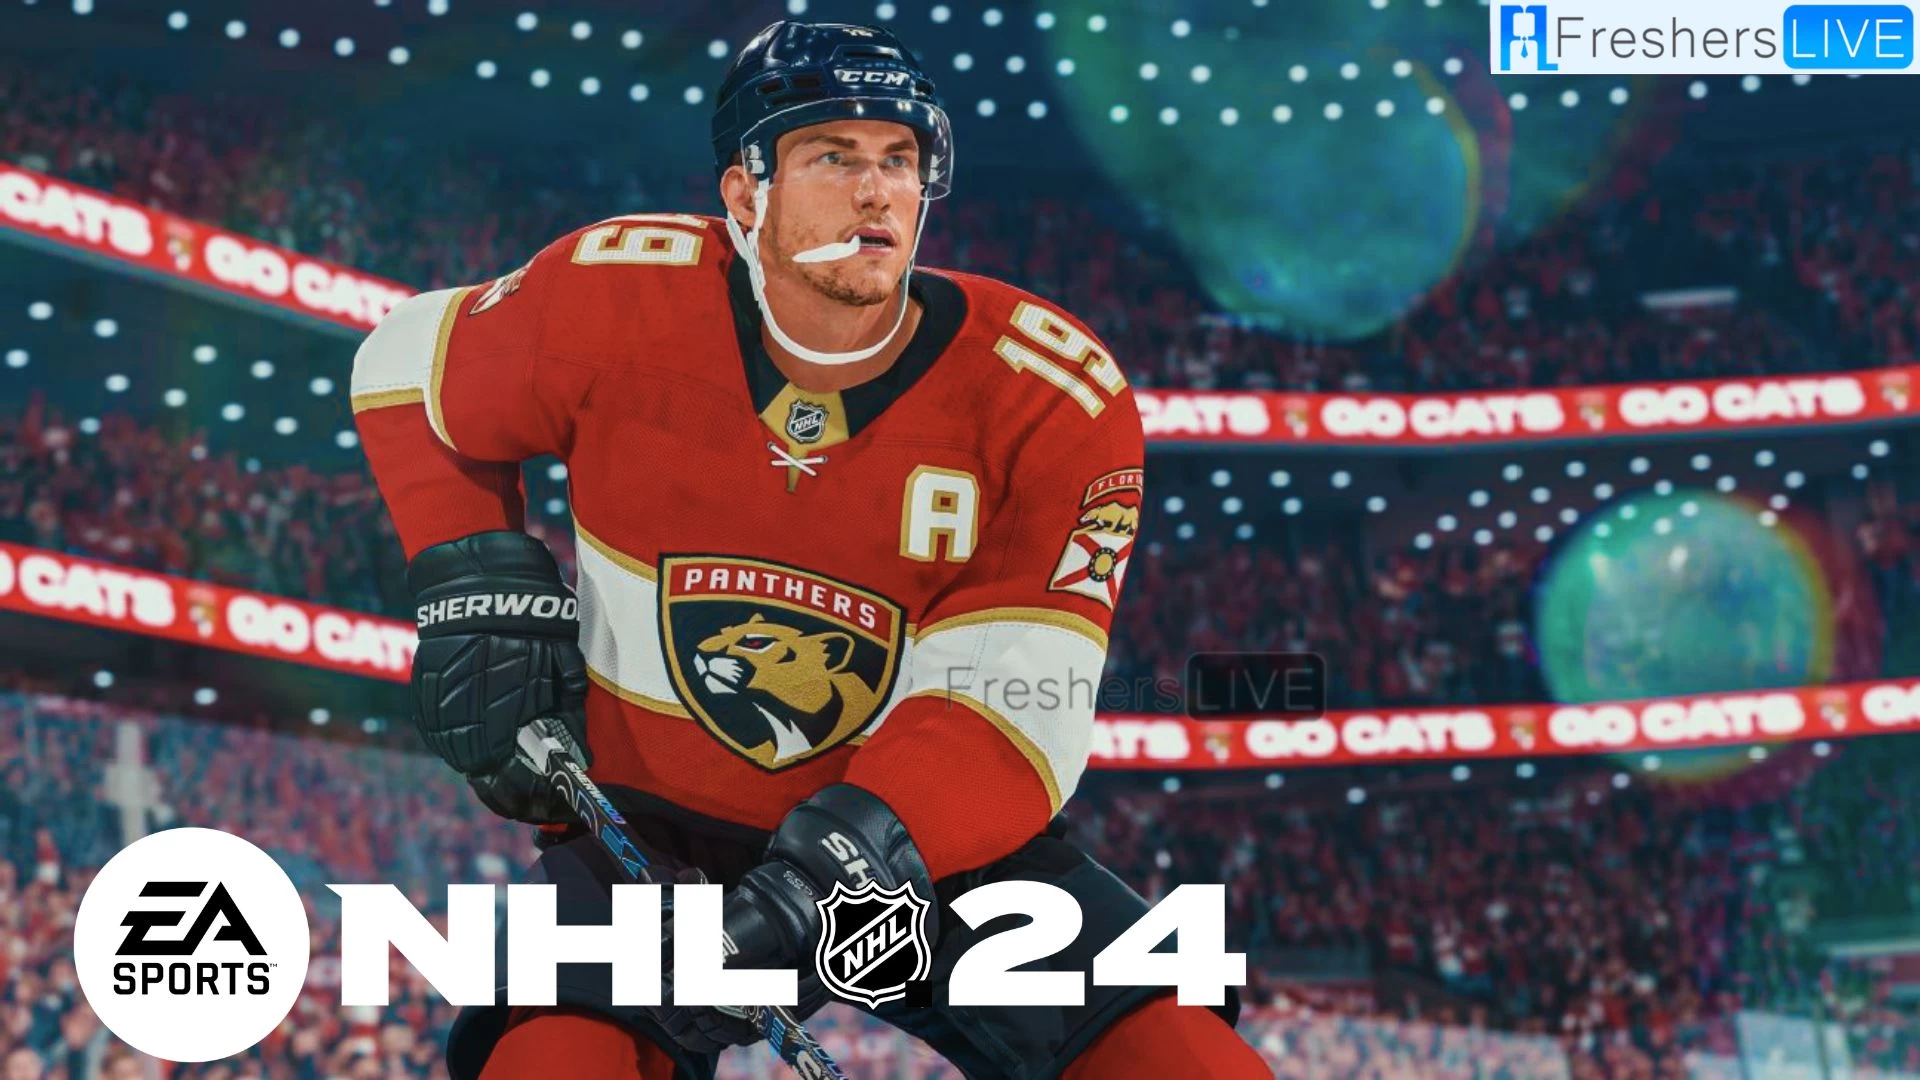 NHL 24 1.1.0 Patch Notes: What's New in the Latest Update?